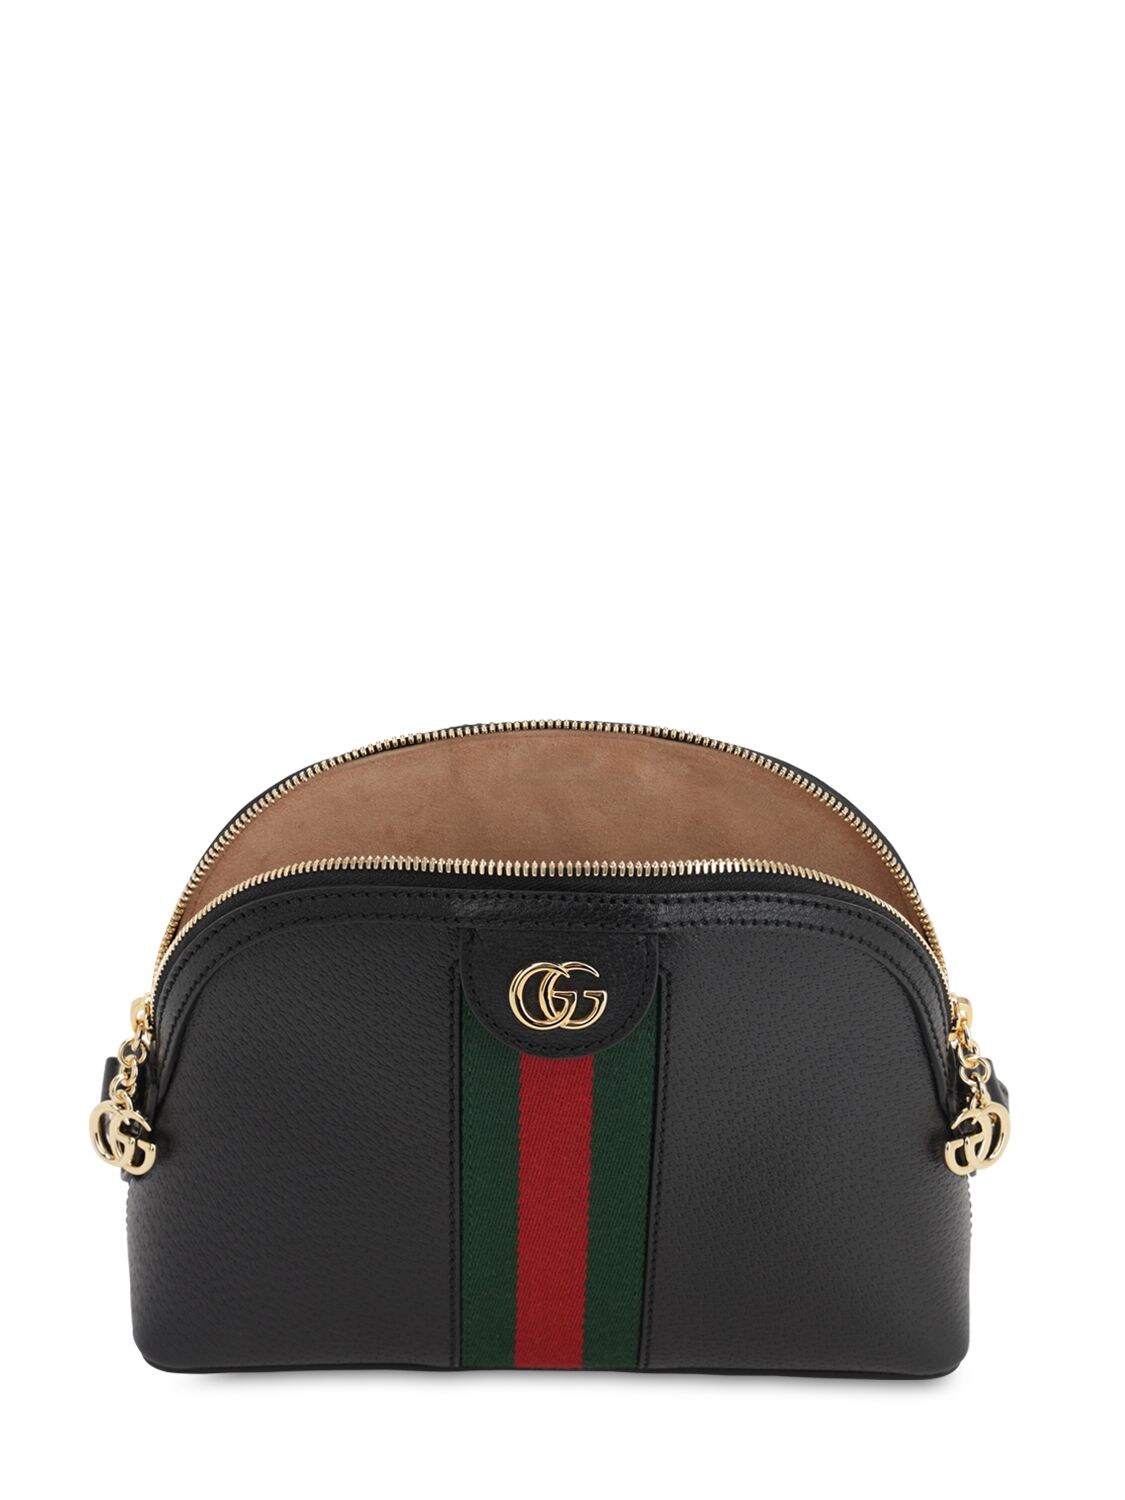 Gucci Small Ophidia Leather Shoulder Bag In Black | ModeSens